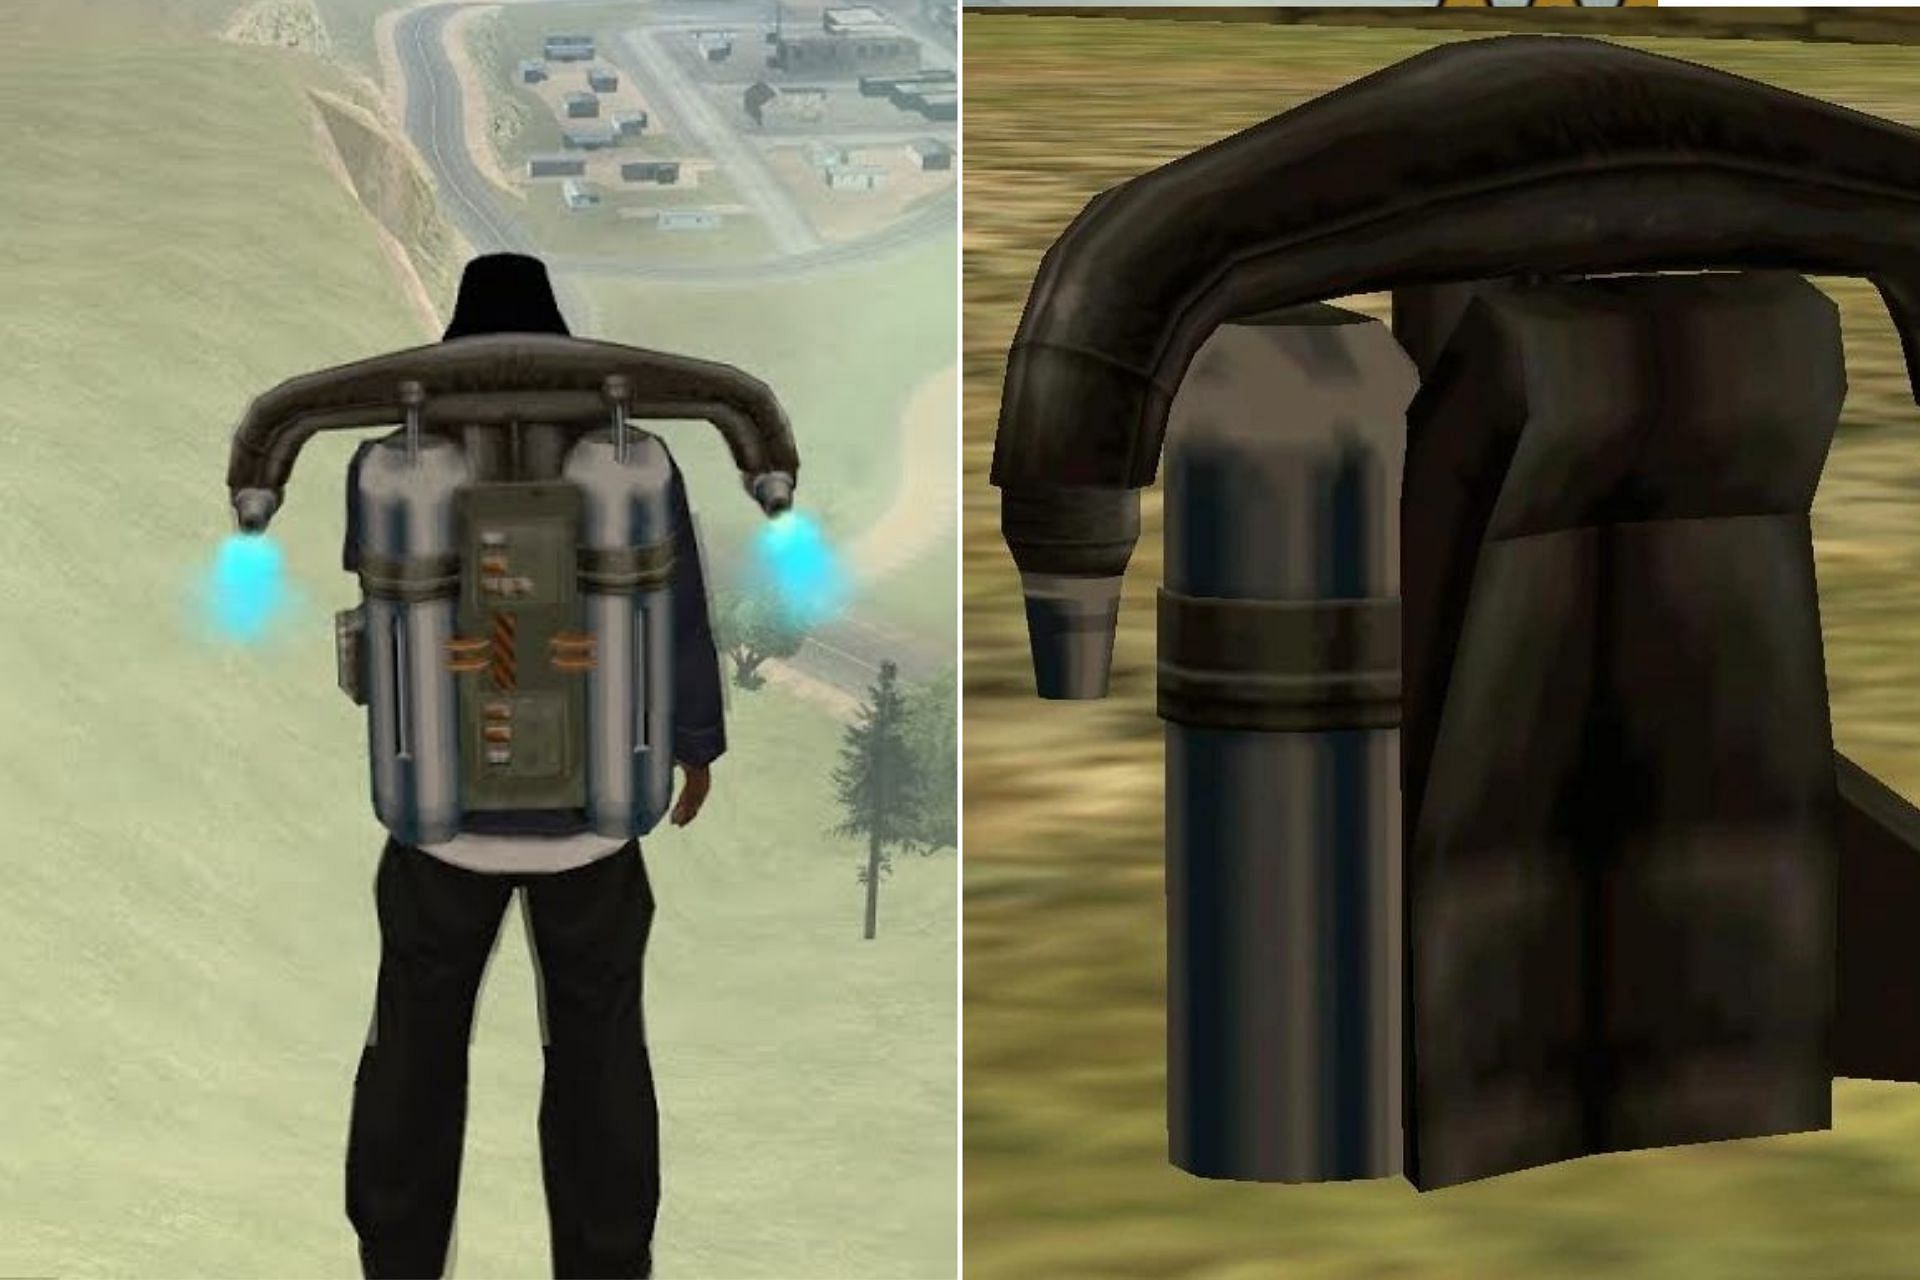 How to get jetpack in GTA San Andreas Definitive Edition